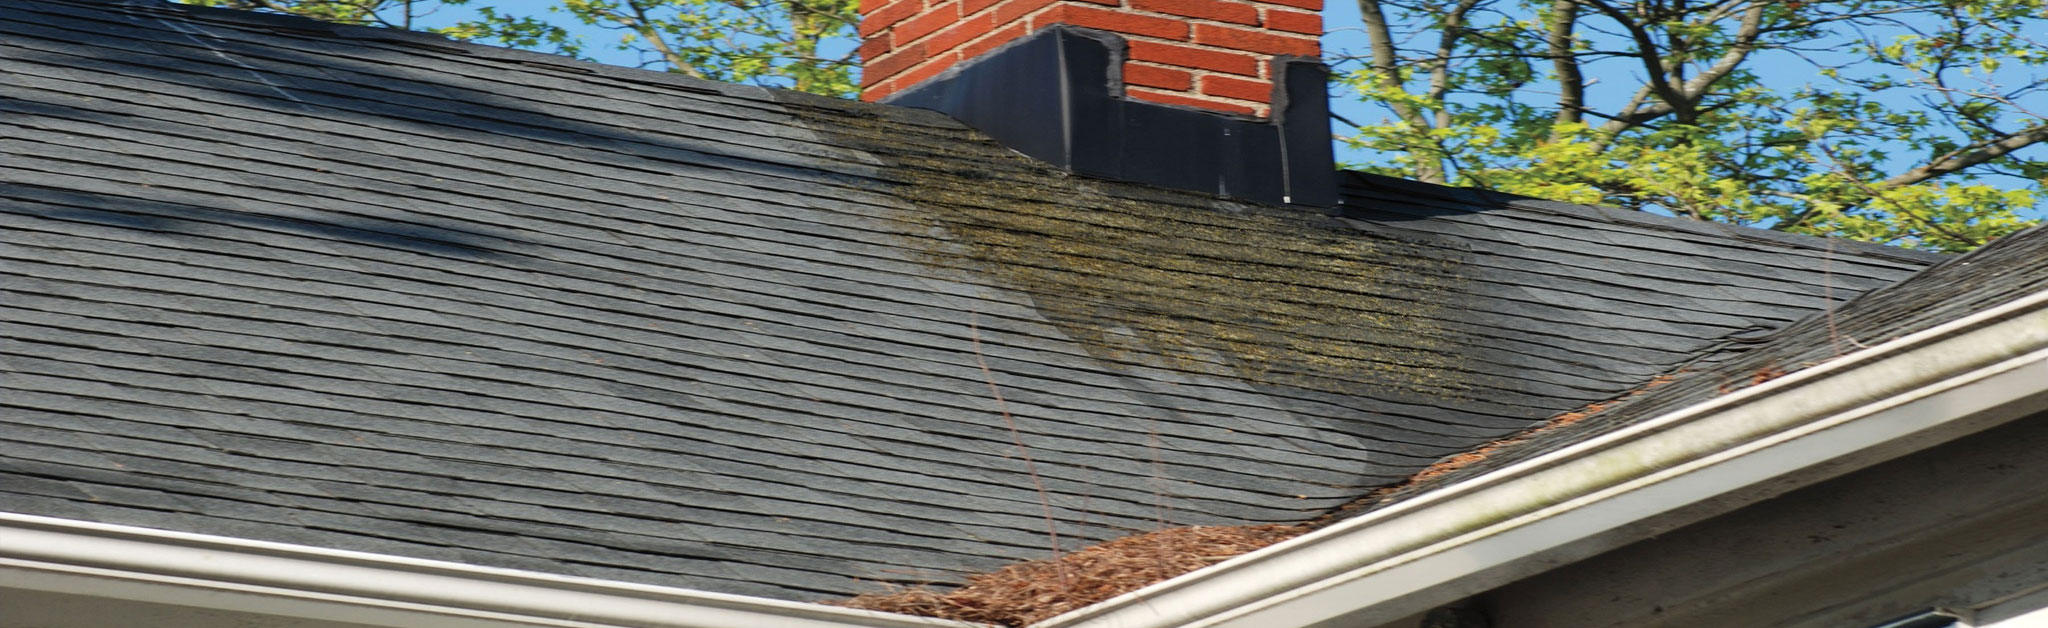 Dukes Roofing Images